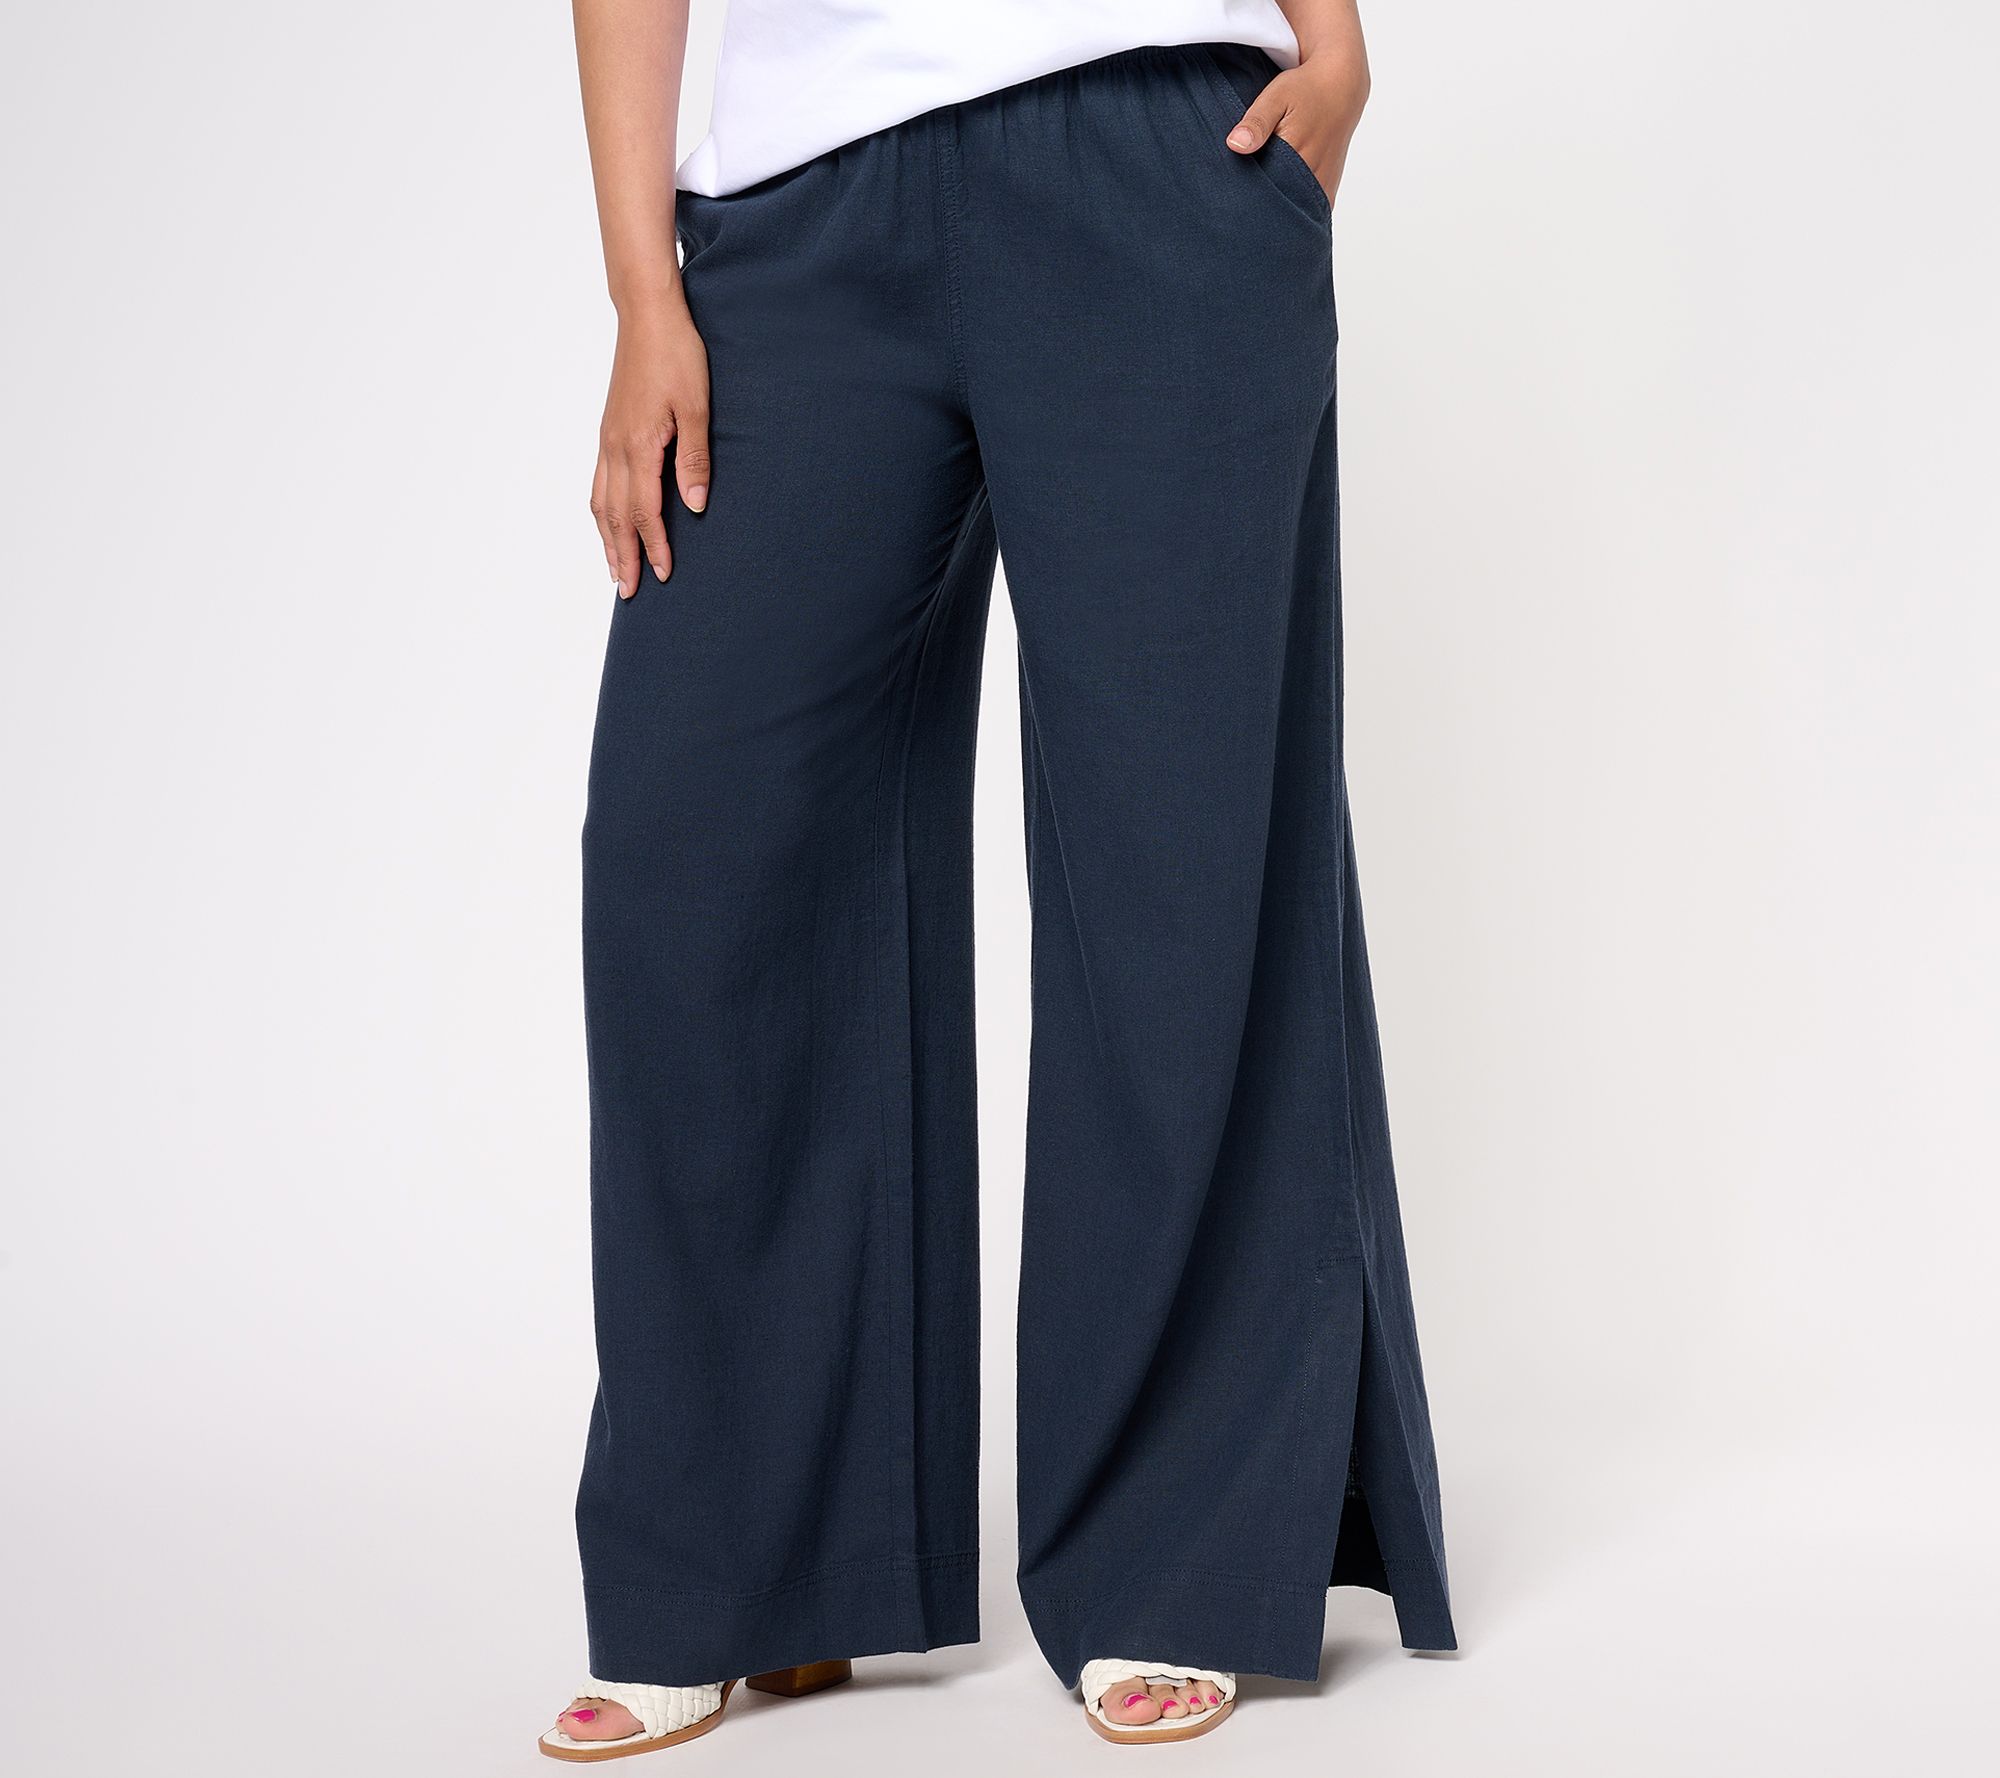 Athletic Works Women's Wide Leg Pants with Side Vents, Sizes XS